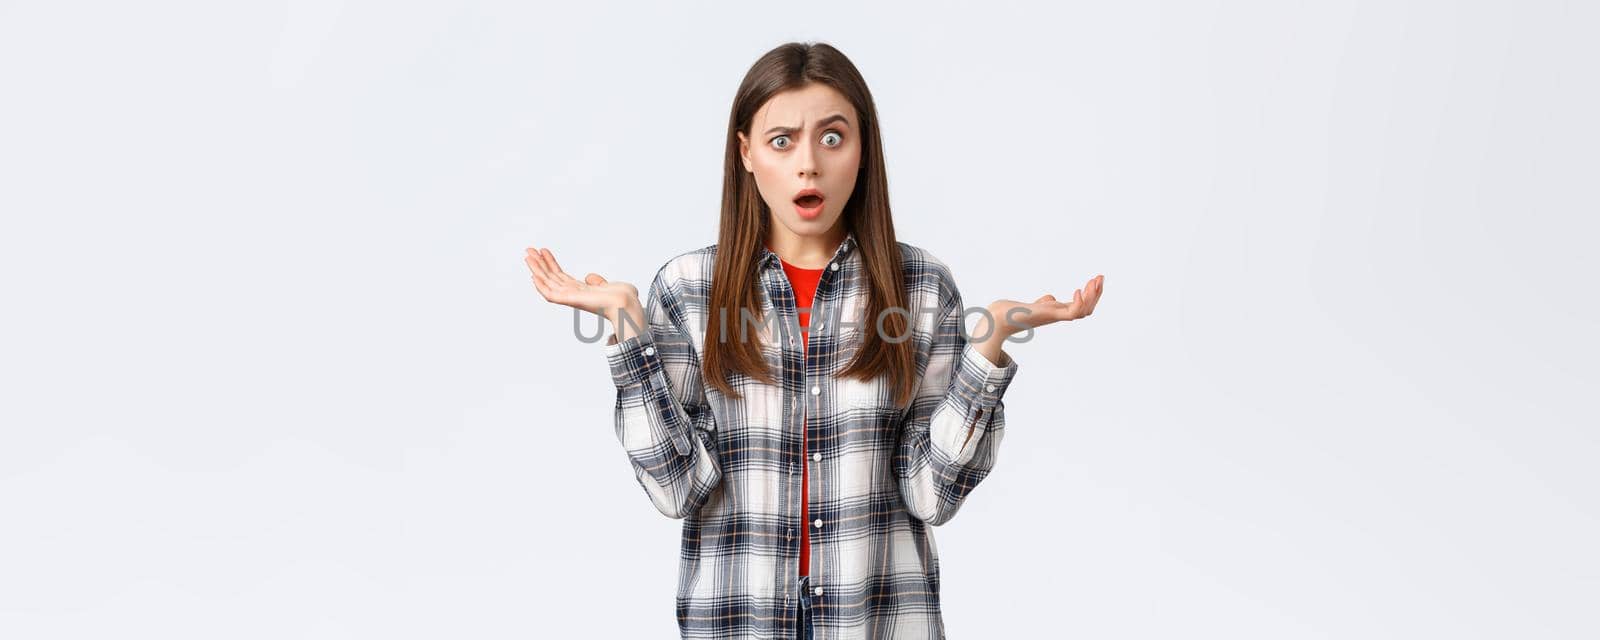 Lifestyle, different emotions, leisure activities concept. Confused and surprised young woman gasping, drop jaw and stare startled from big news, spread hands sideways, unexpected situation.